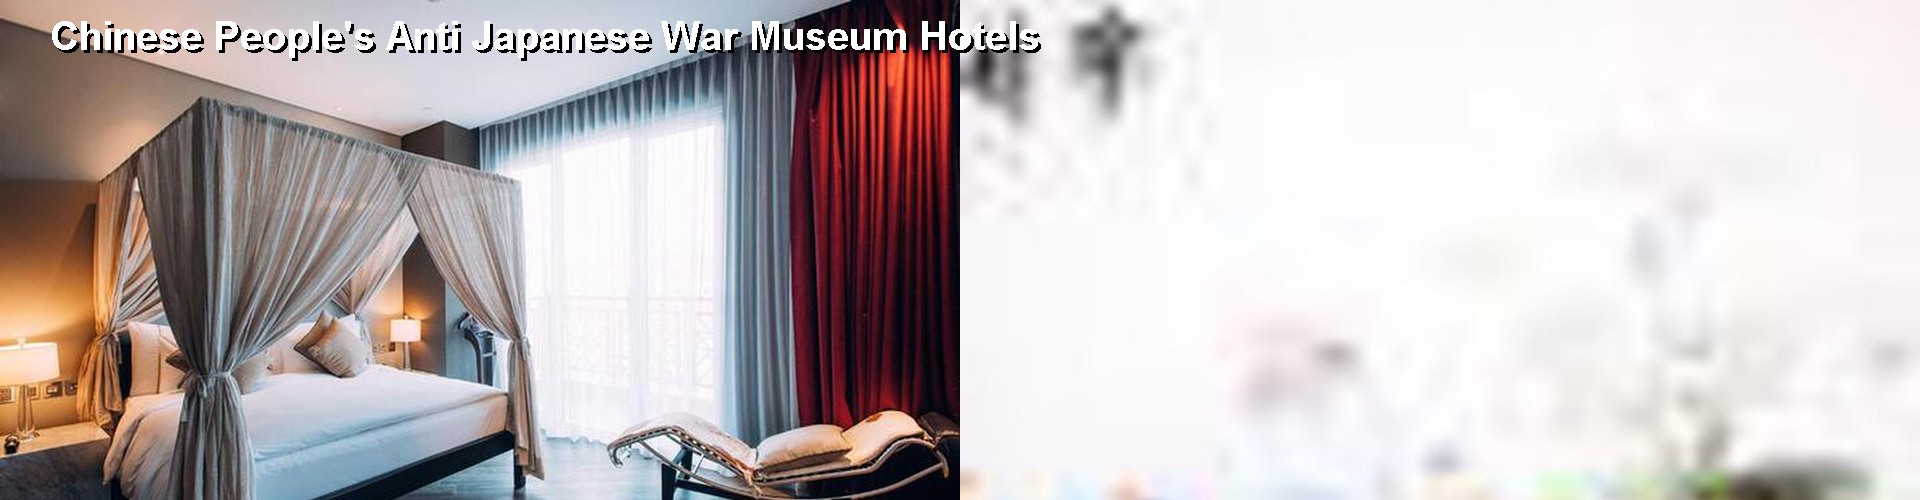 2 Best Hotels near Chinese People's Anti Japanese War Museum